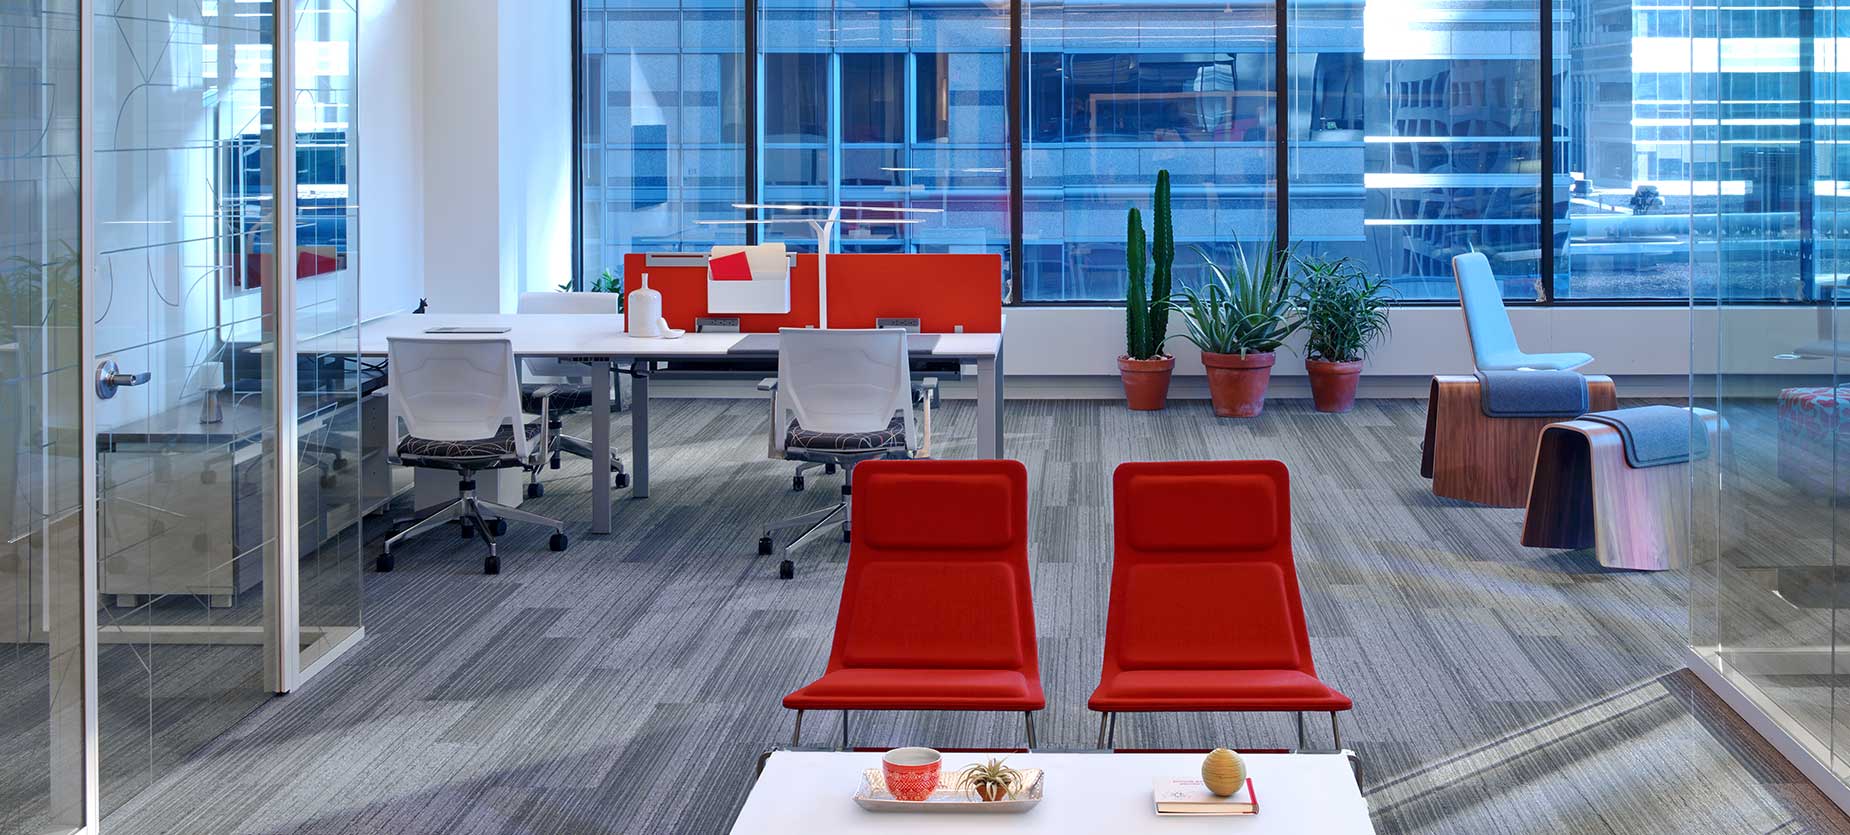 Low Pad lounge chairs from Haworth Collection offer informal seating, while the end of the showroom space is designed with Reside Benching, workware and Very Conference chairs.